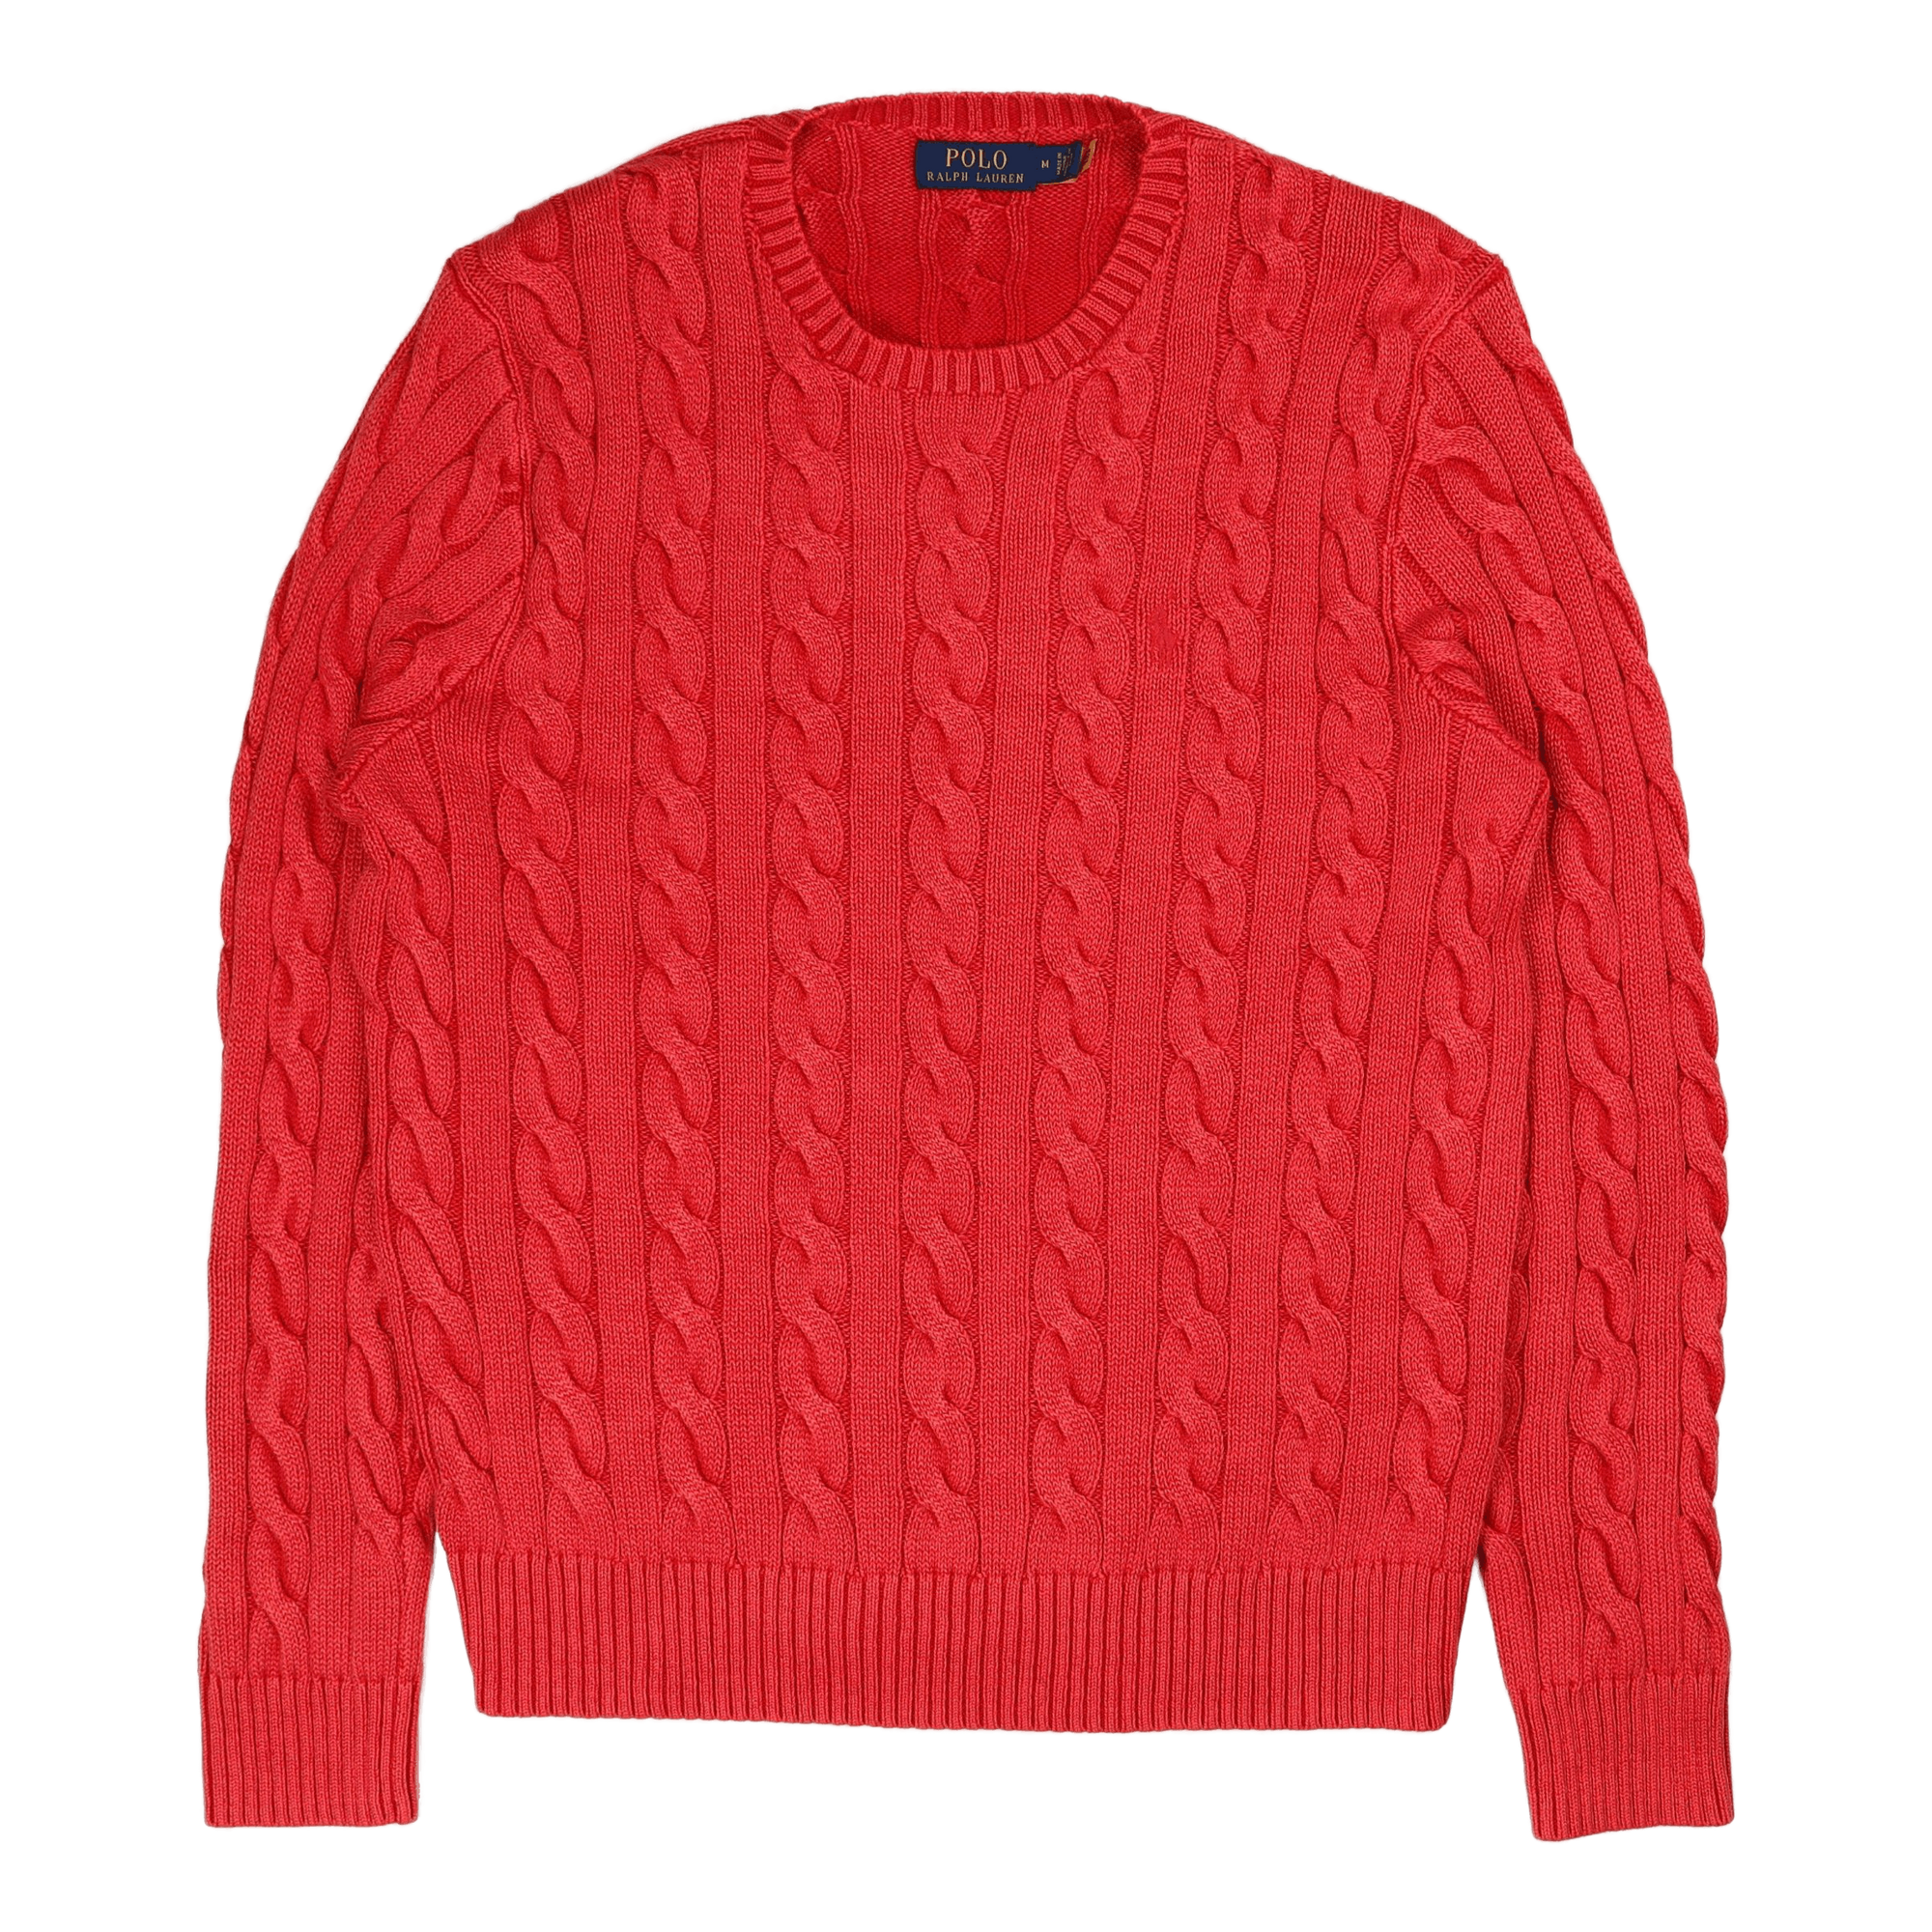 Garment-Dyed Cable-Knit Cotton Sweater Red Gmd